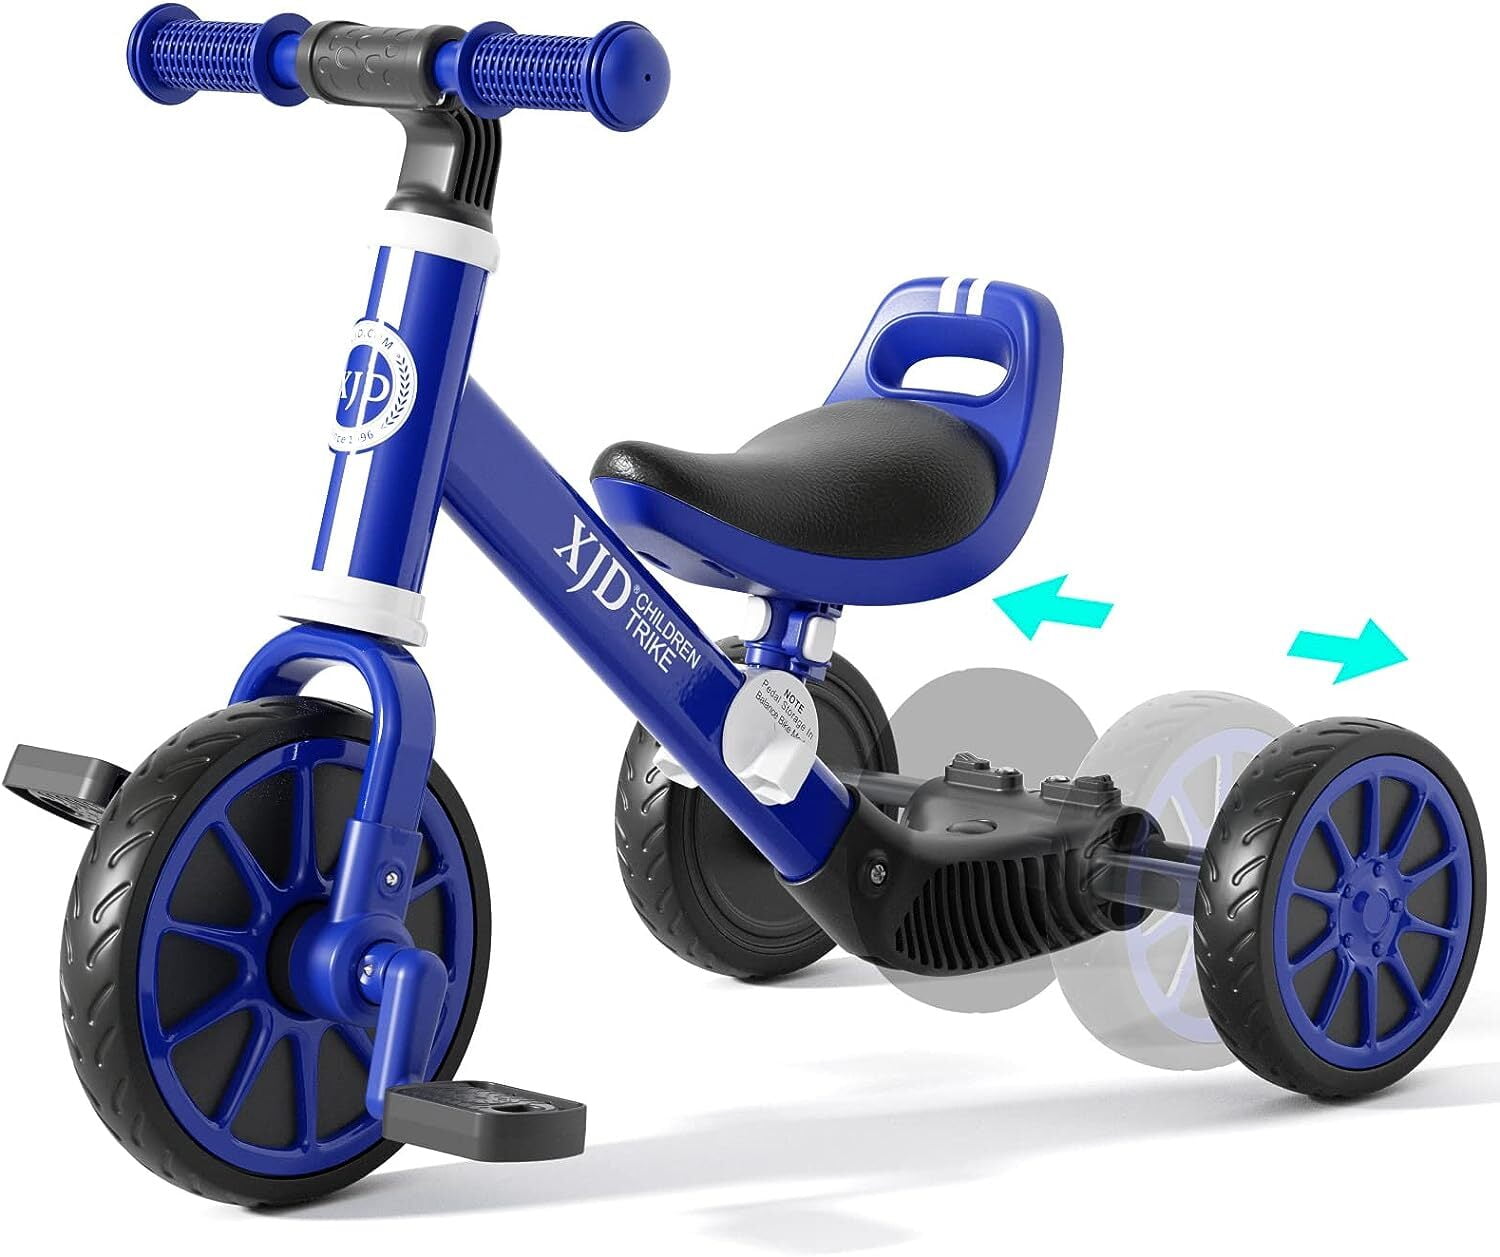 XJD 5 in 1 Toddler Bike for 1-5 Years Old Boys Girls Tricycles for ...